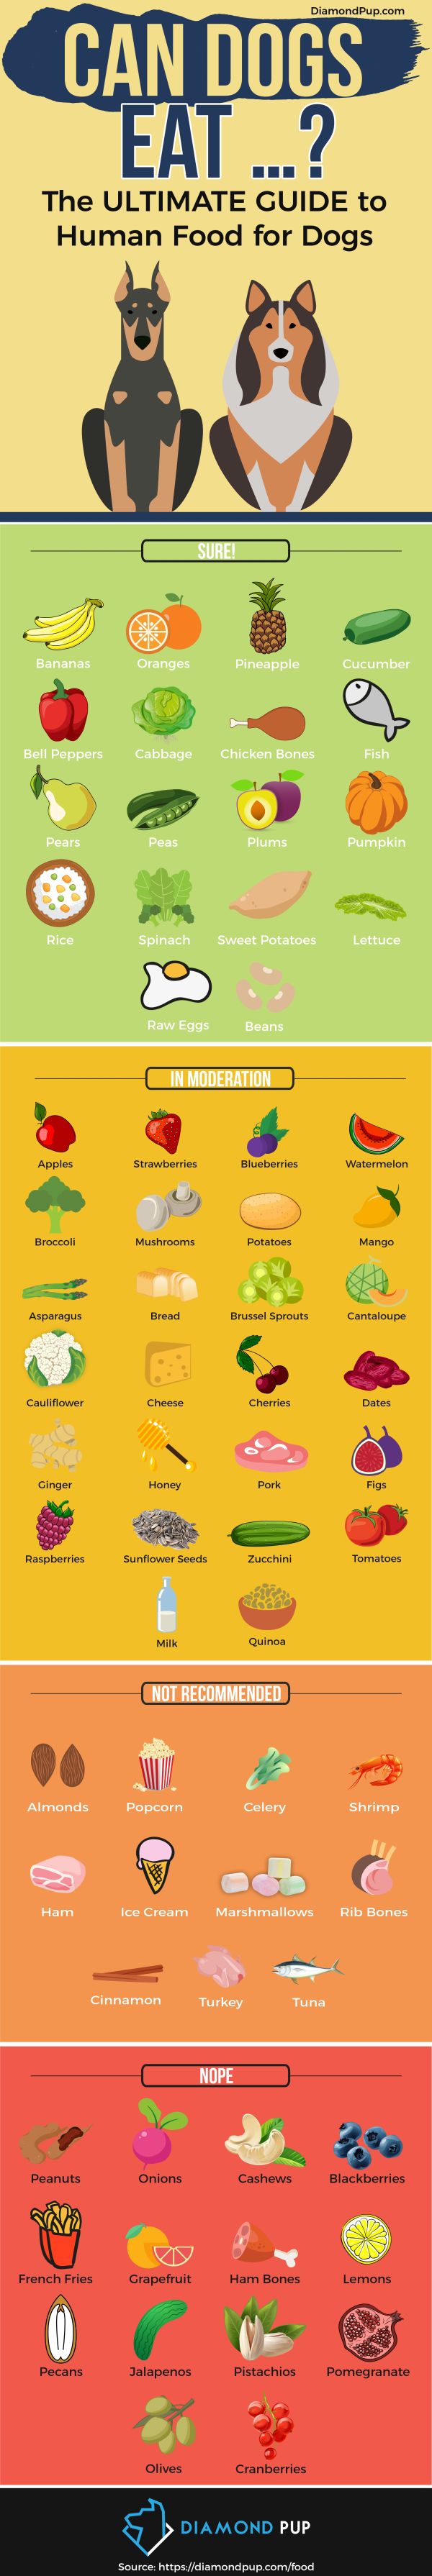 69 Human Foods You Can Feed Your Dog [Infographic]